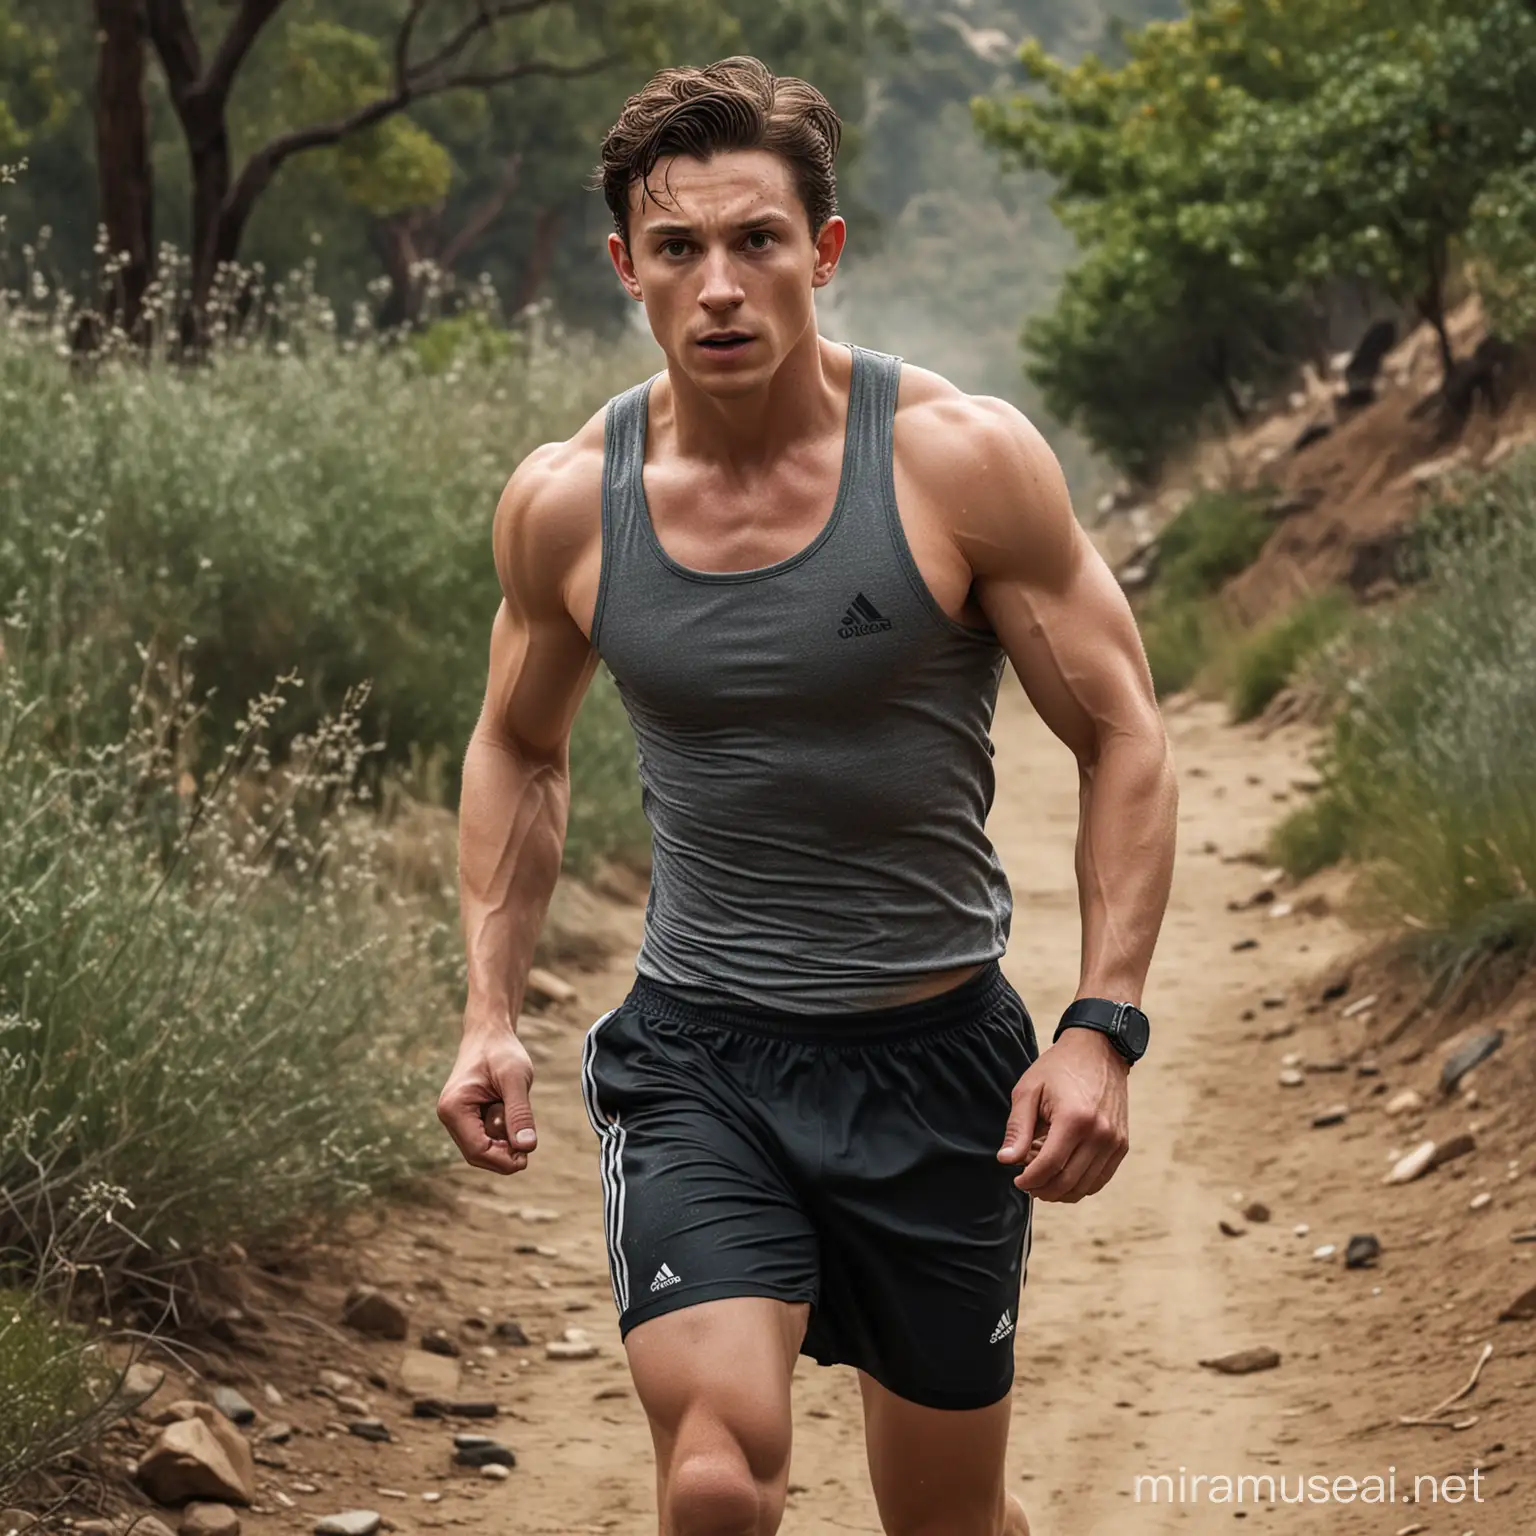 A hyper-realistic photo of a sweaty muscular bodybuilder Tom Holland running in tight Adidas running shorts around Runyon Canyon. 